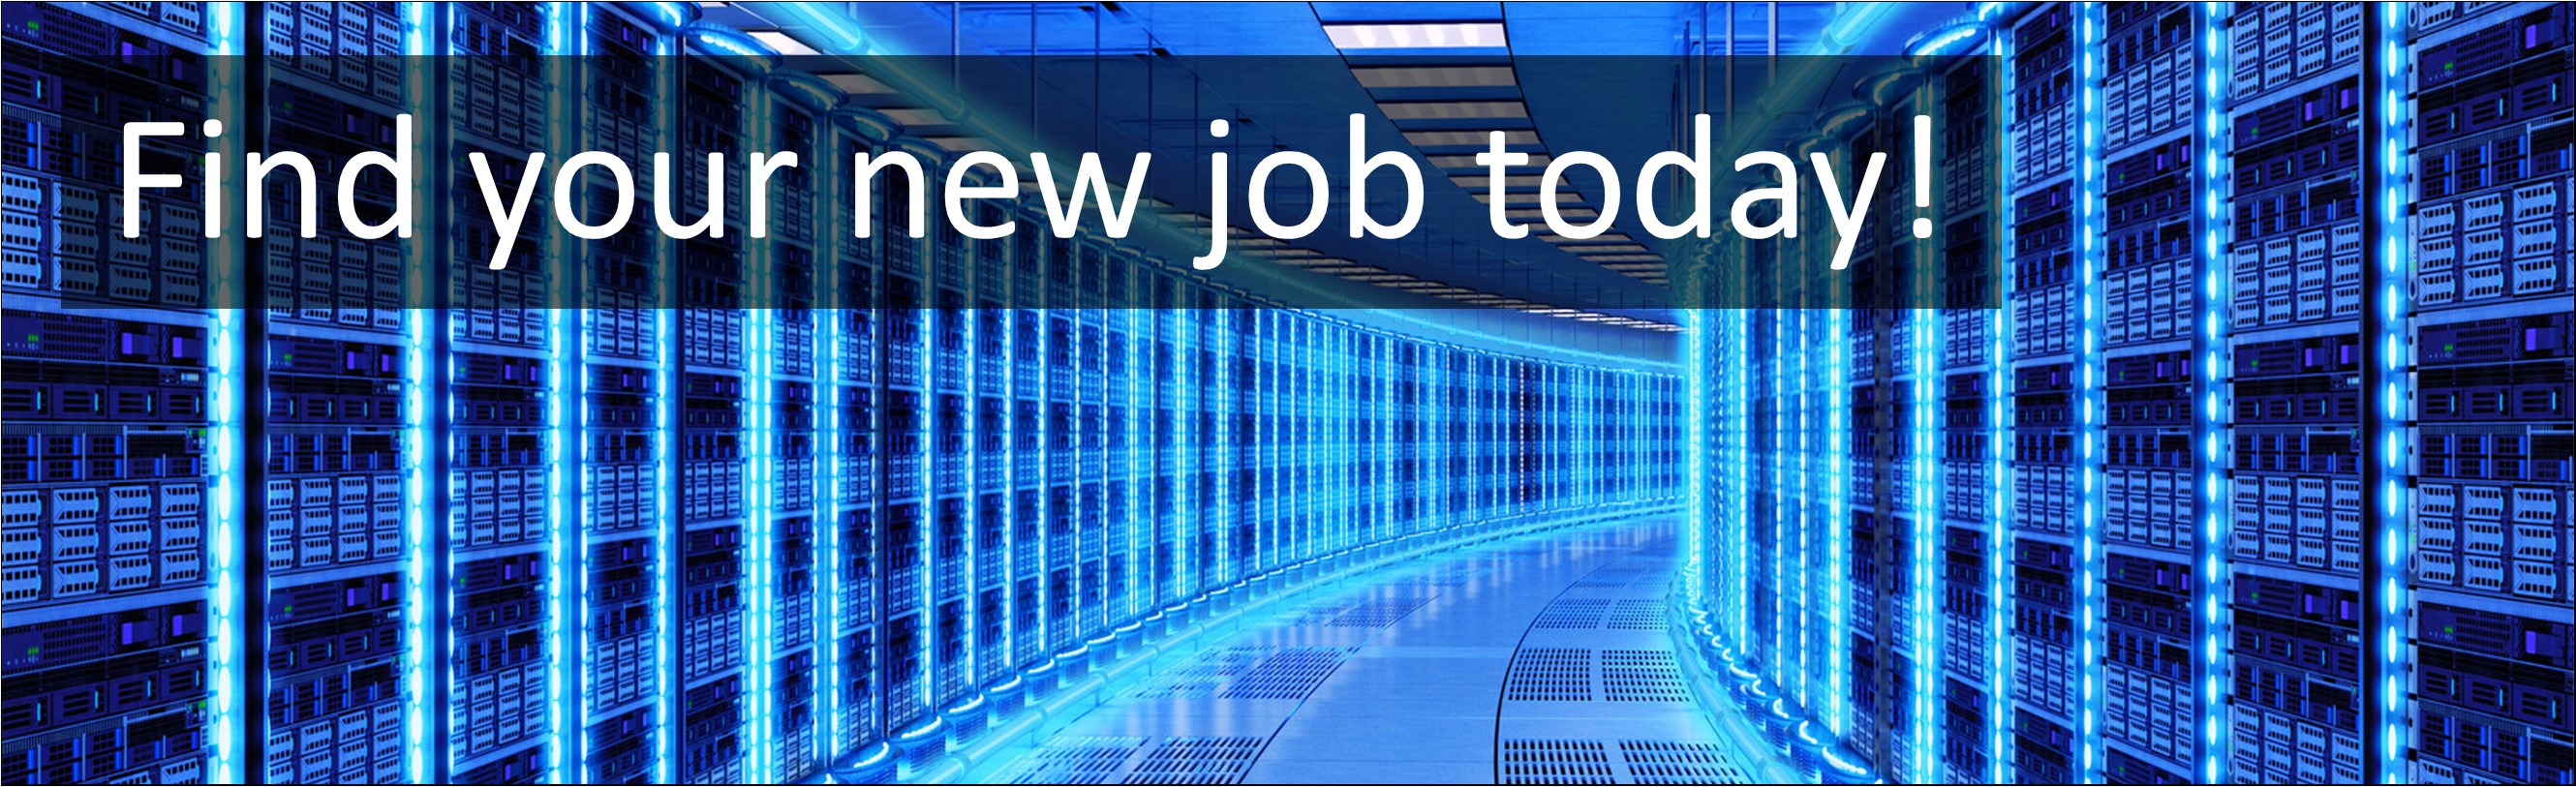 IT & Communication Jobs. : IT Help Desk Support Engineer / Service Desk Analyst / First & Second Line Jobs, Careers & Vacancies in Dudley, West Midlands Advertised by AWD online – Multi-Job Board Advertising and CV Sourcing Recruitment Services